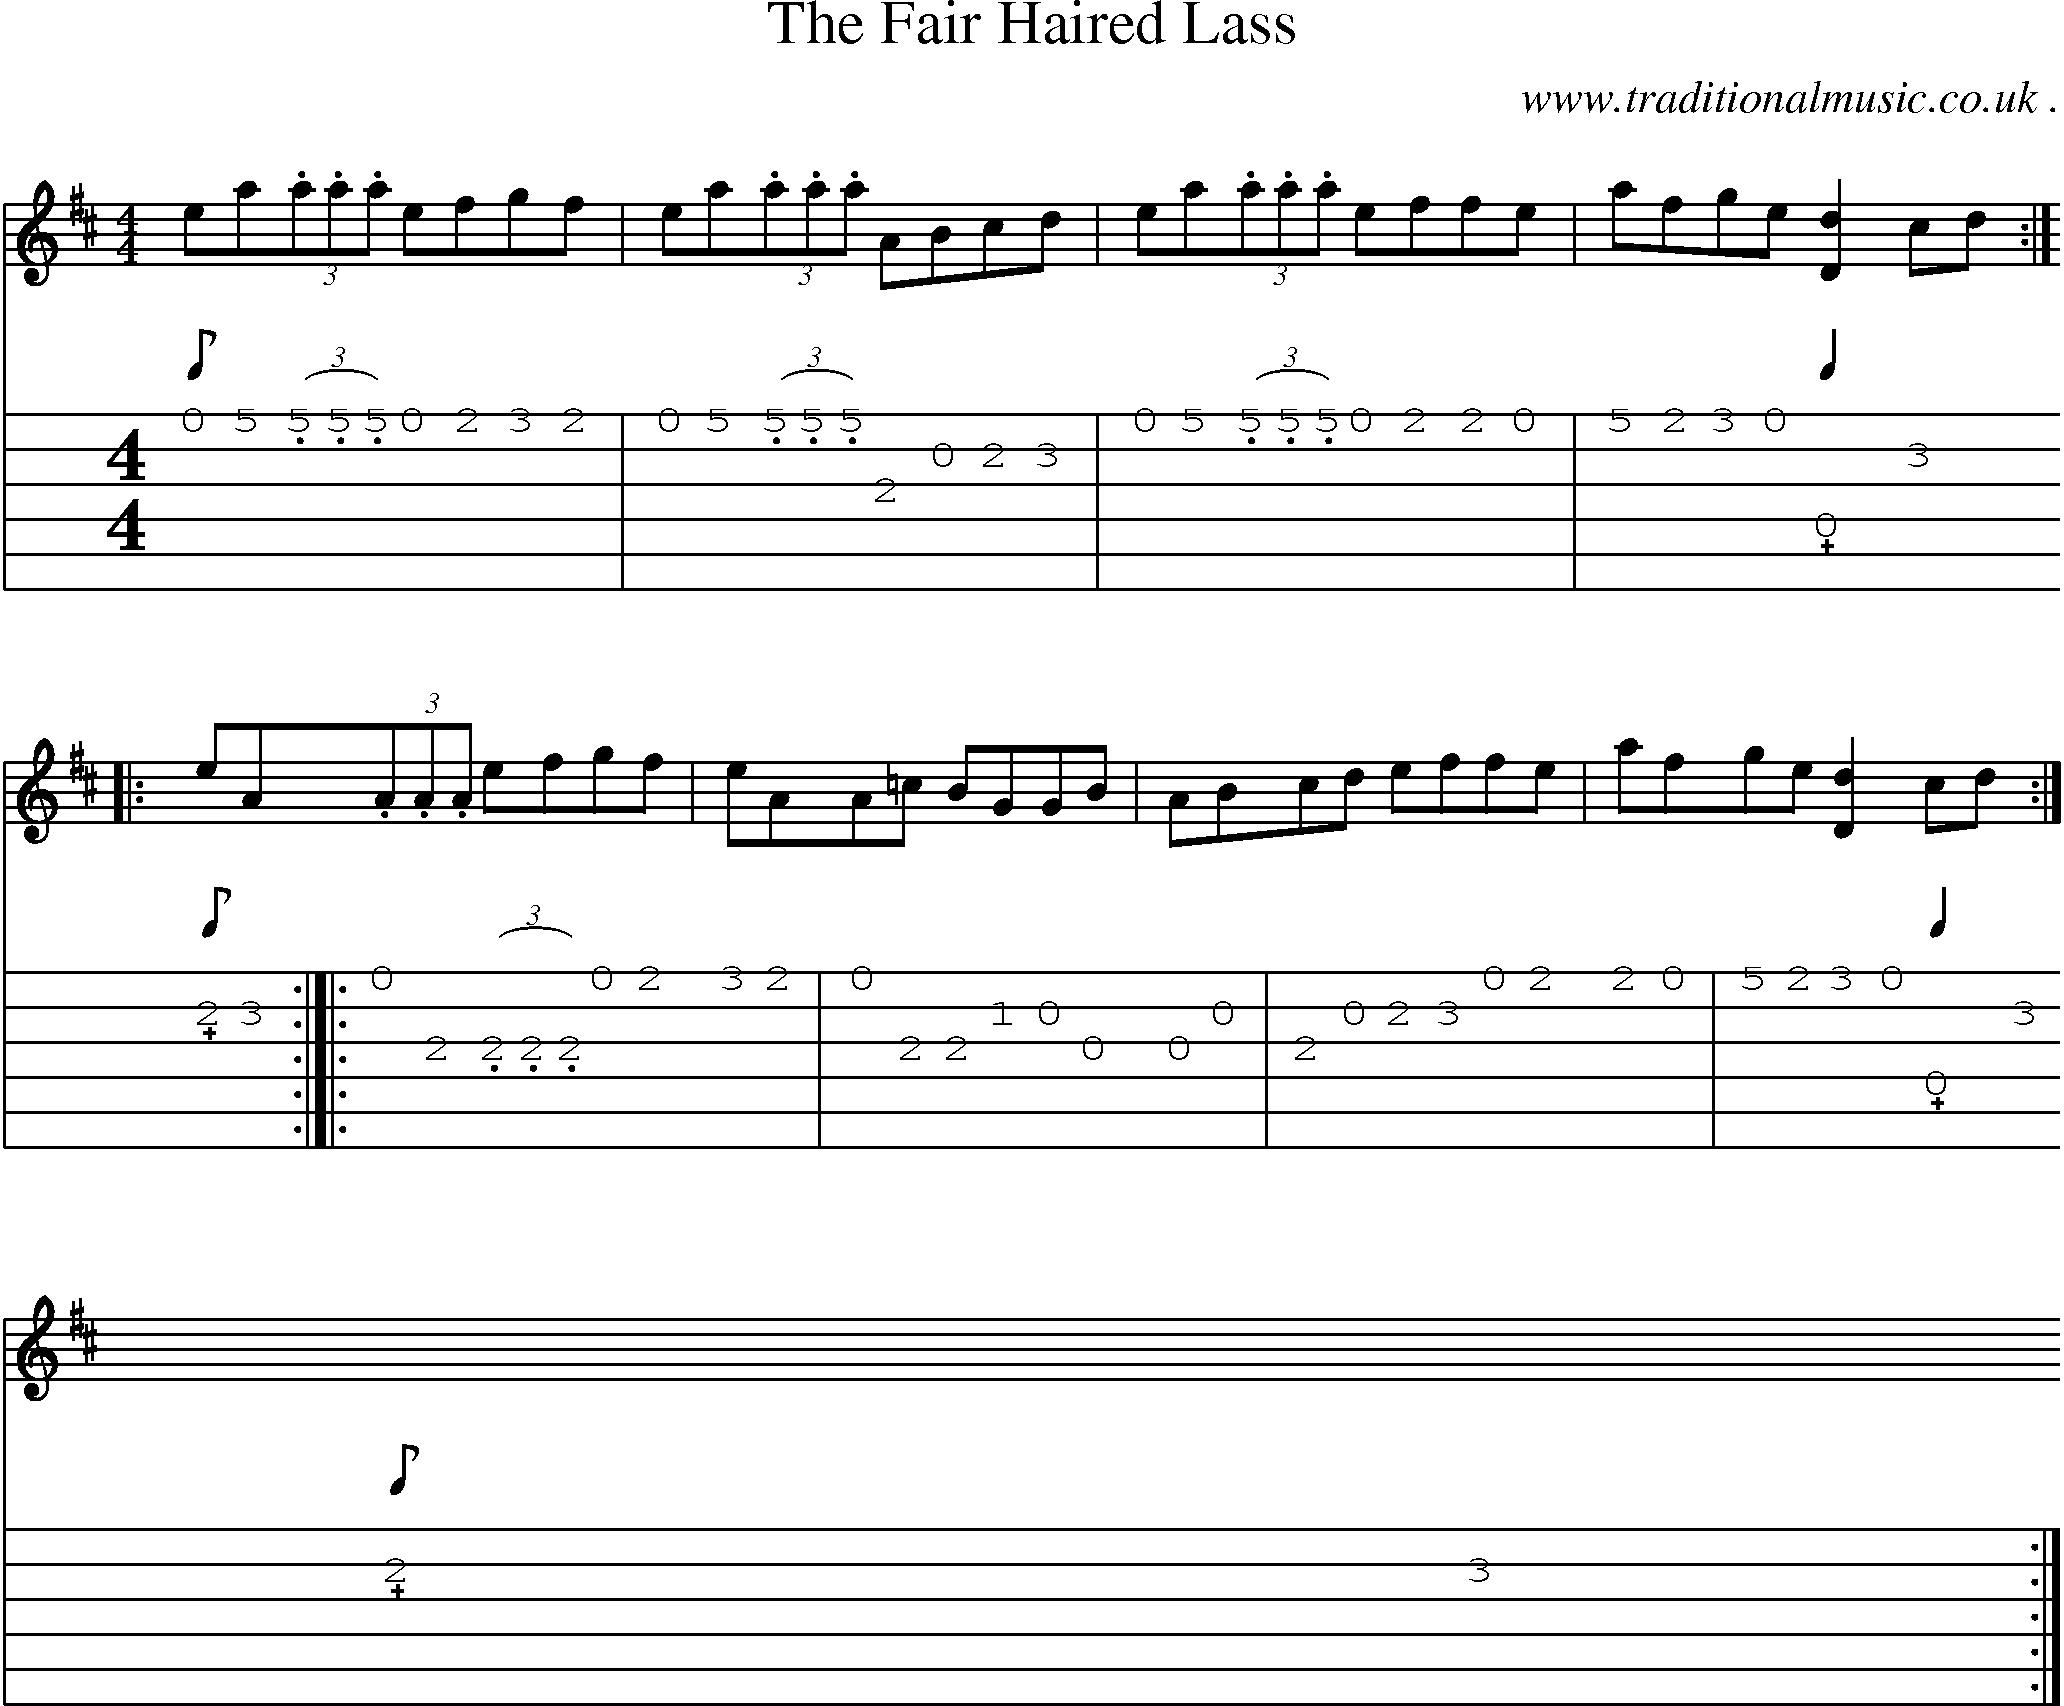 Sheet-Music and Guitar Tabs for The Fair Haired Lass